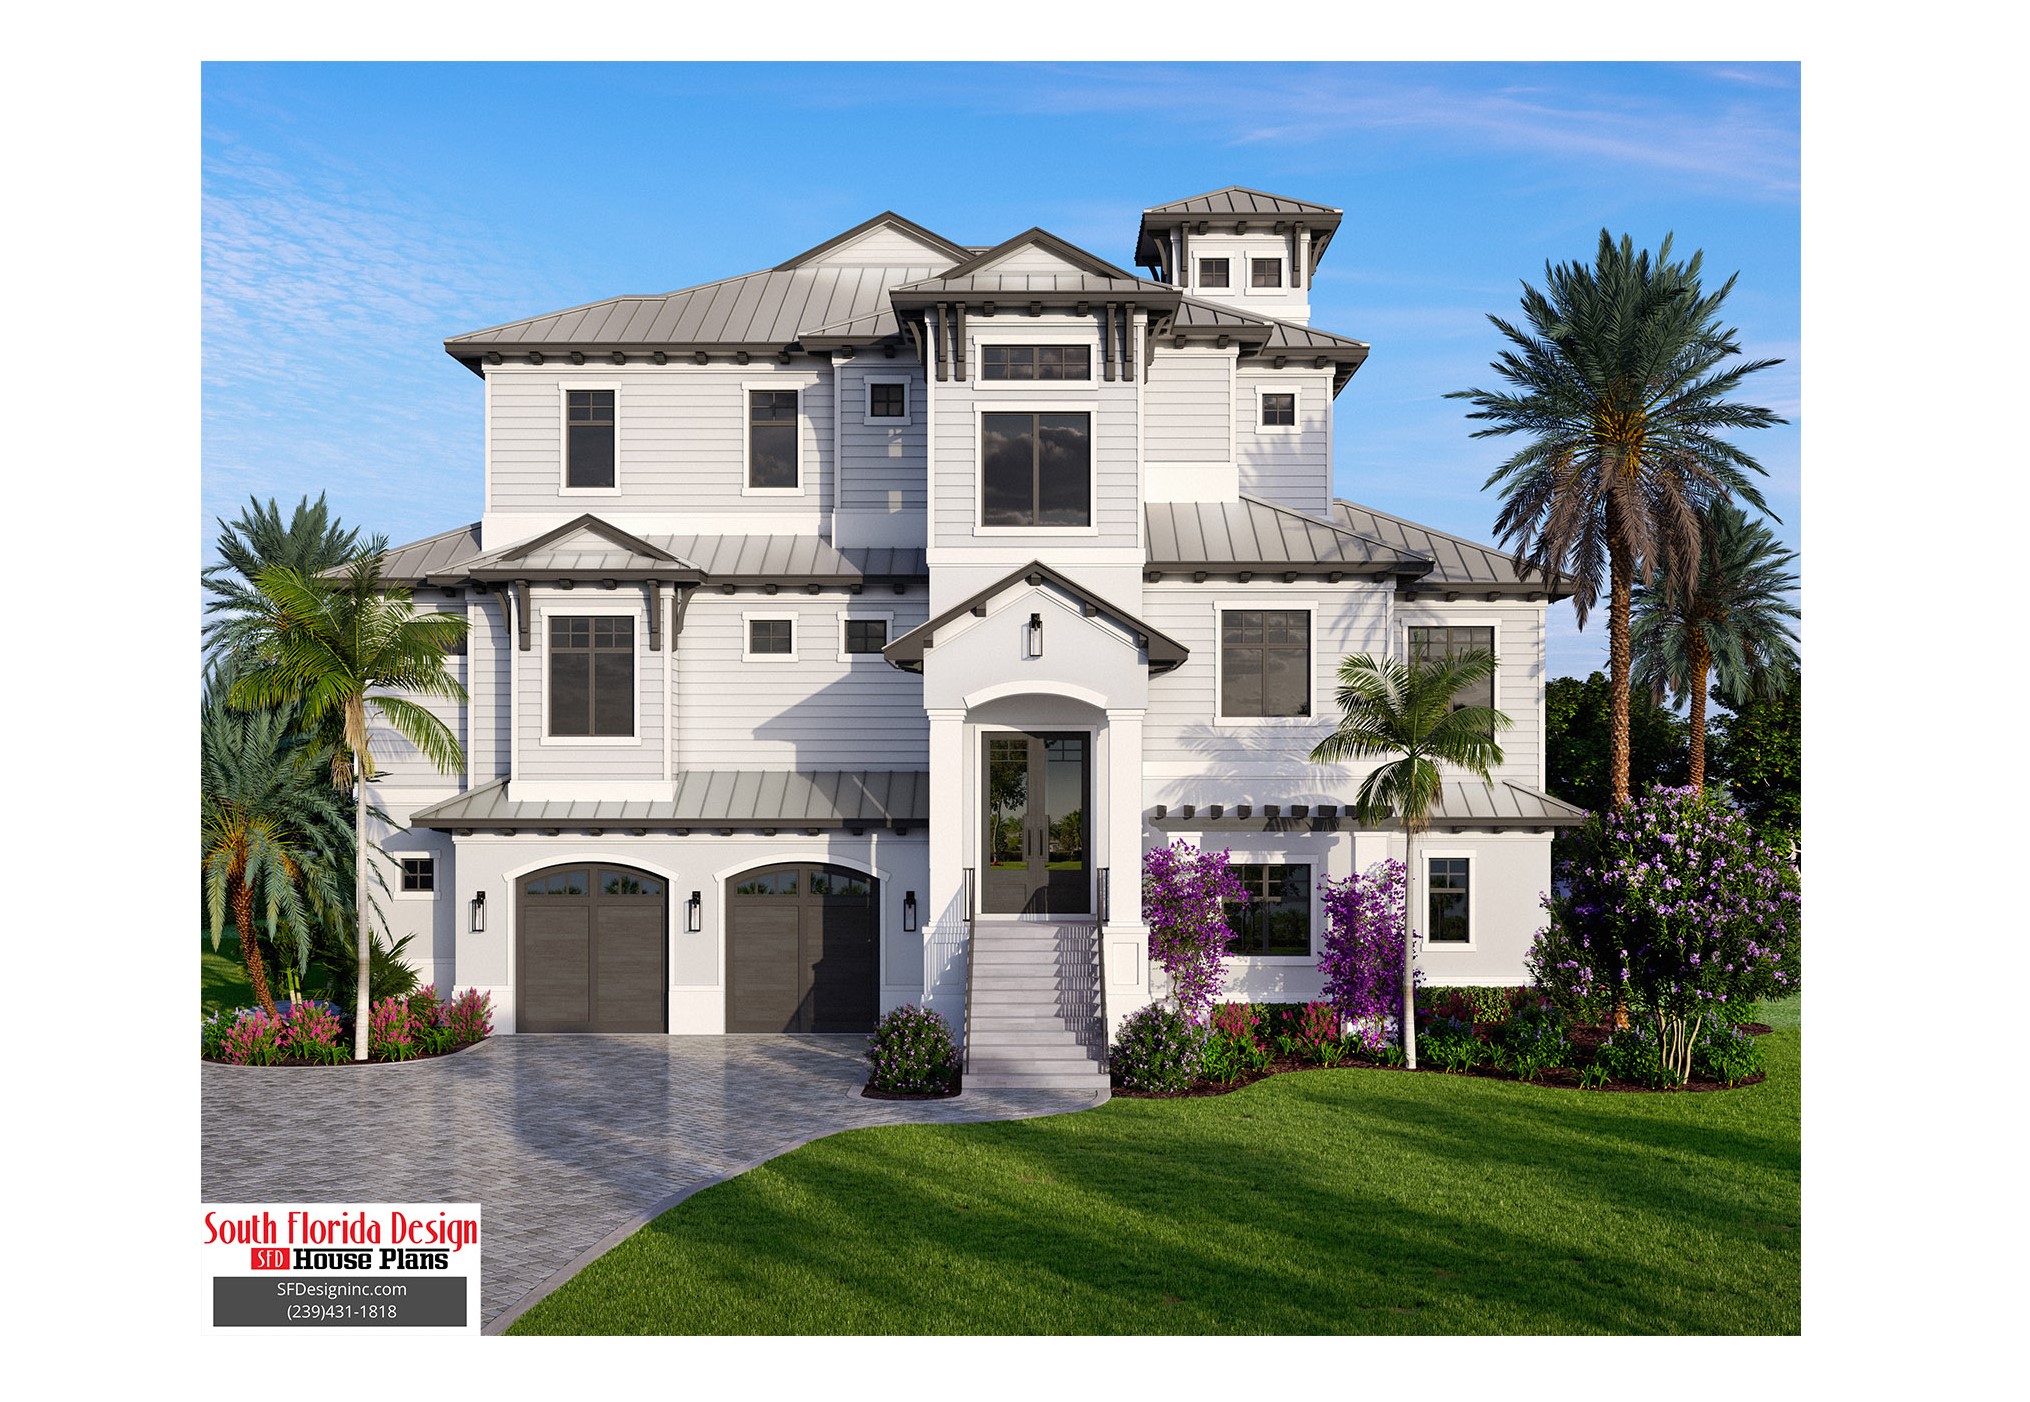 Color front rendering of a 3-story beach house